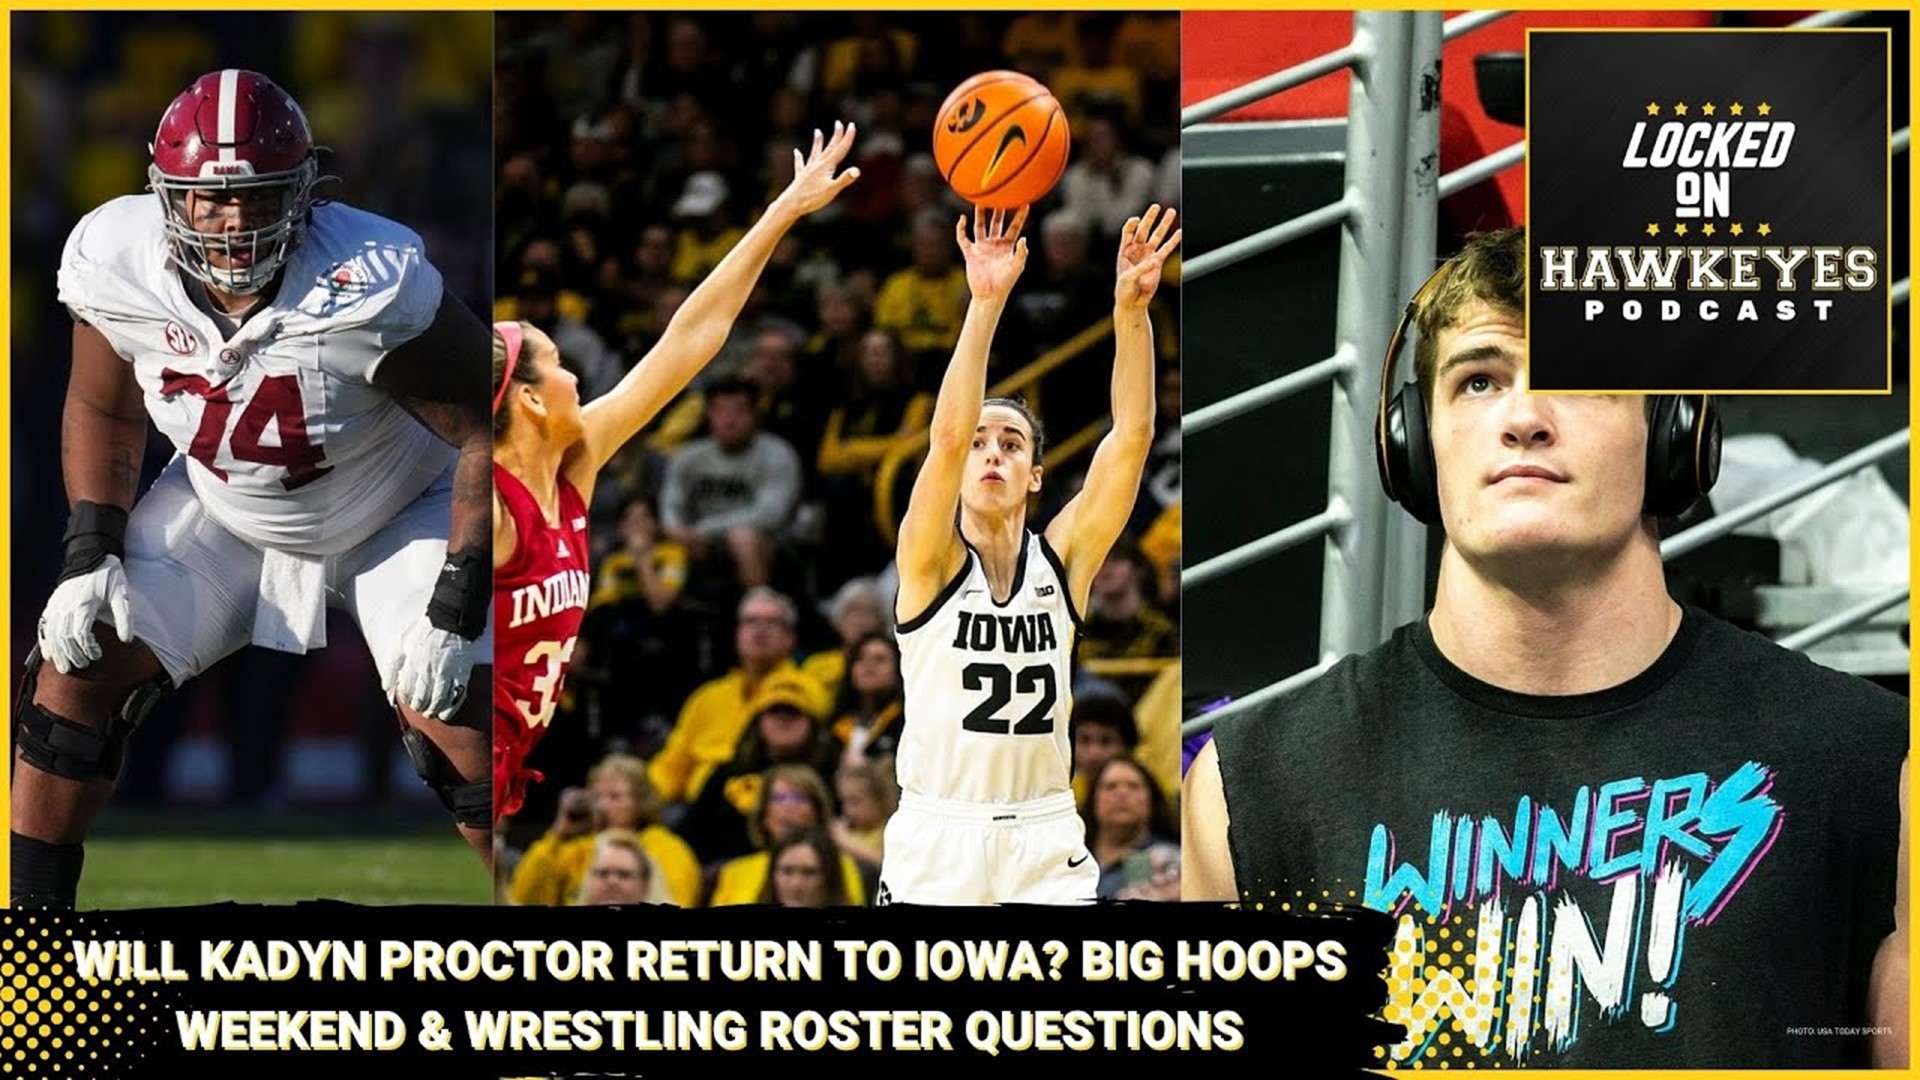 Kadyn Proctor coming home? New faces for Hawkeye Wrestling? & the hoops weekend with David Eickholt